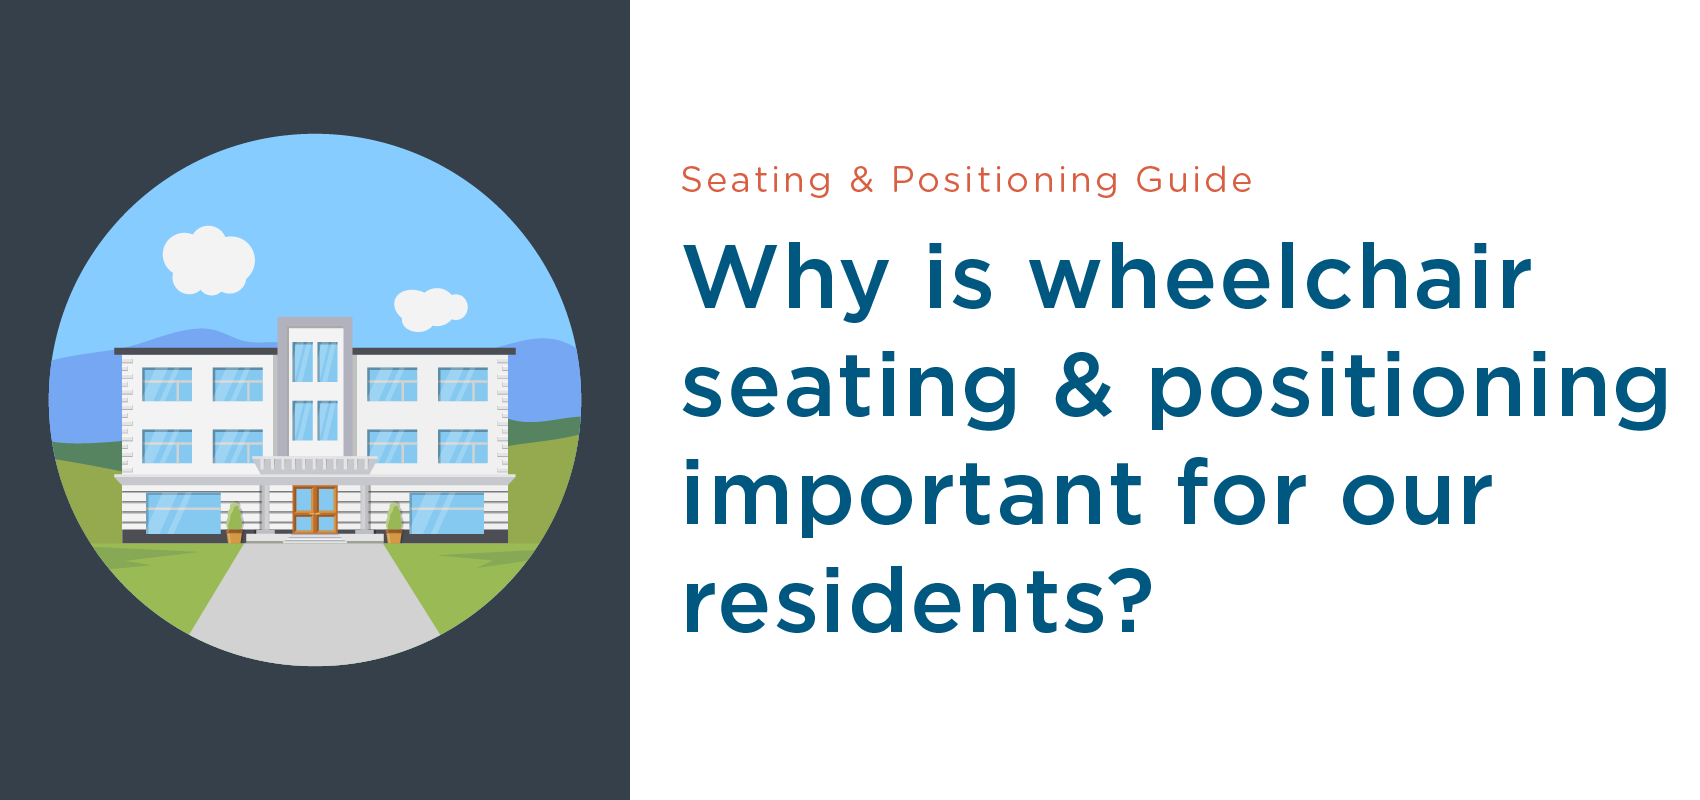 Seating & Positioning Guide